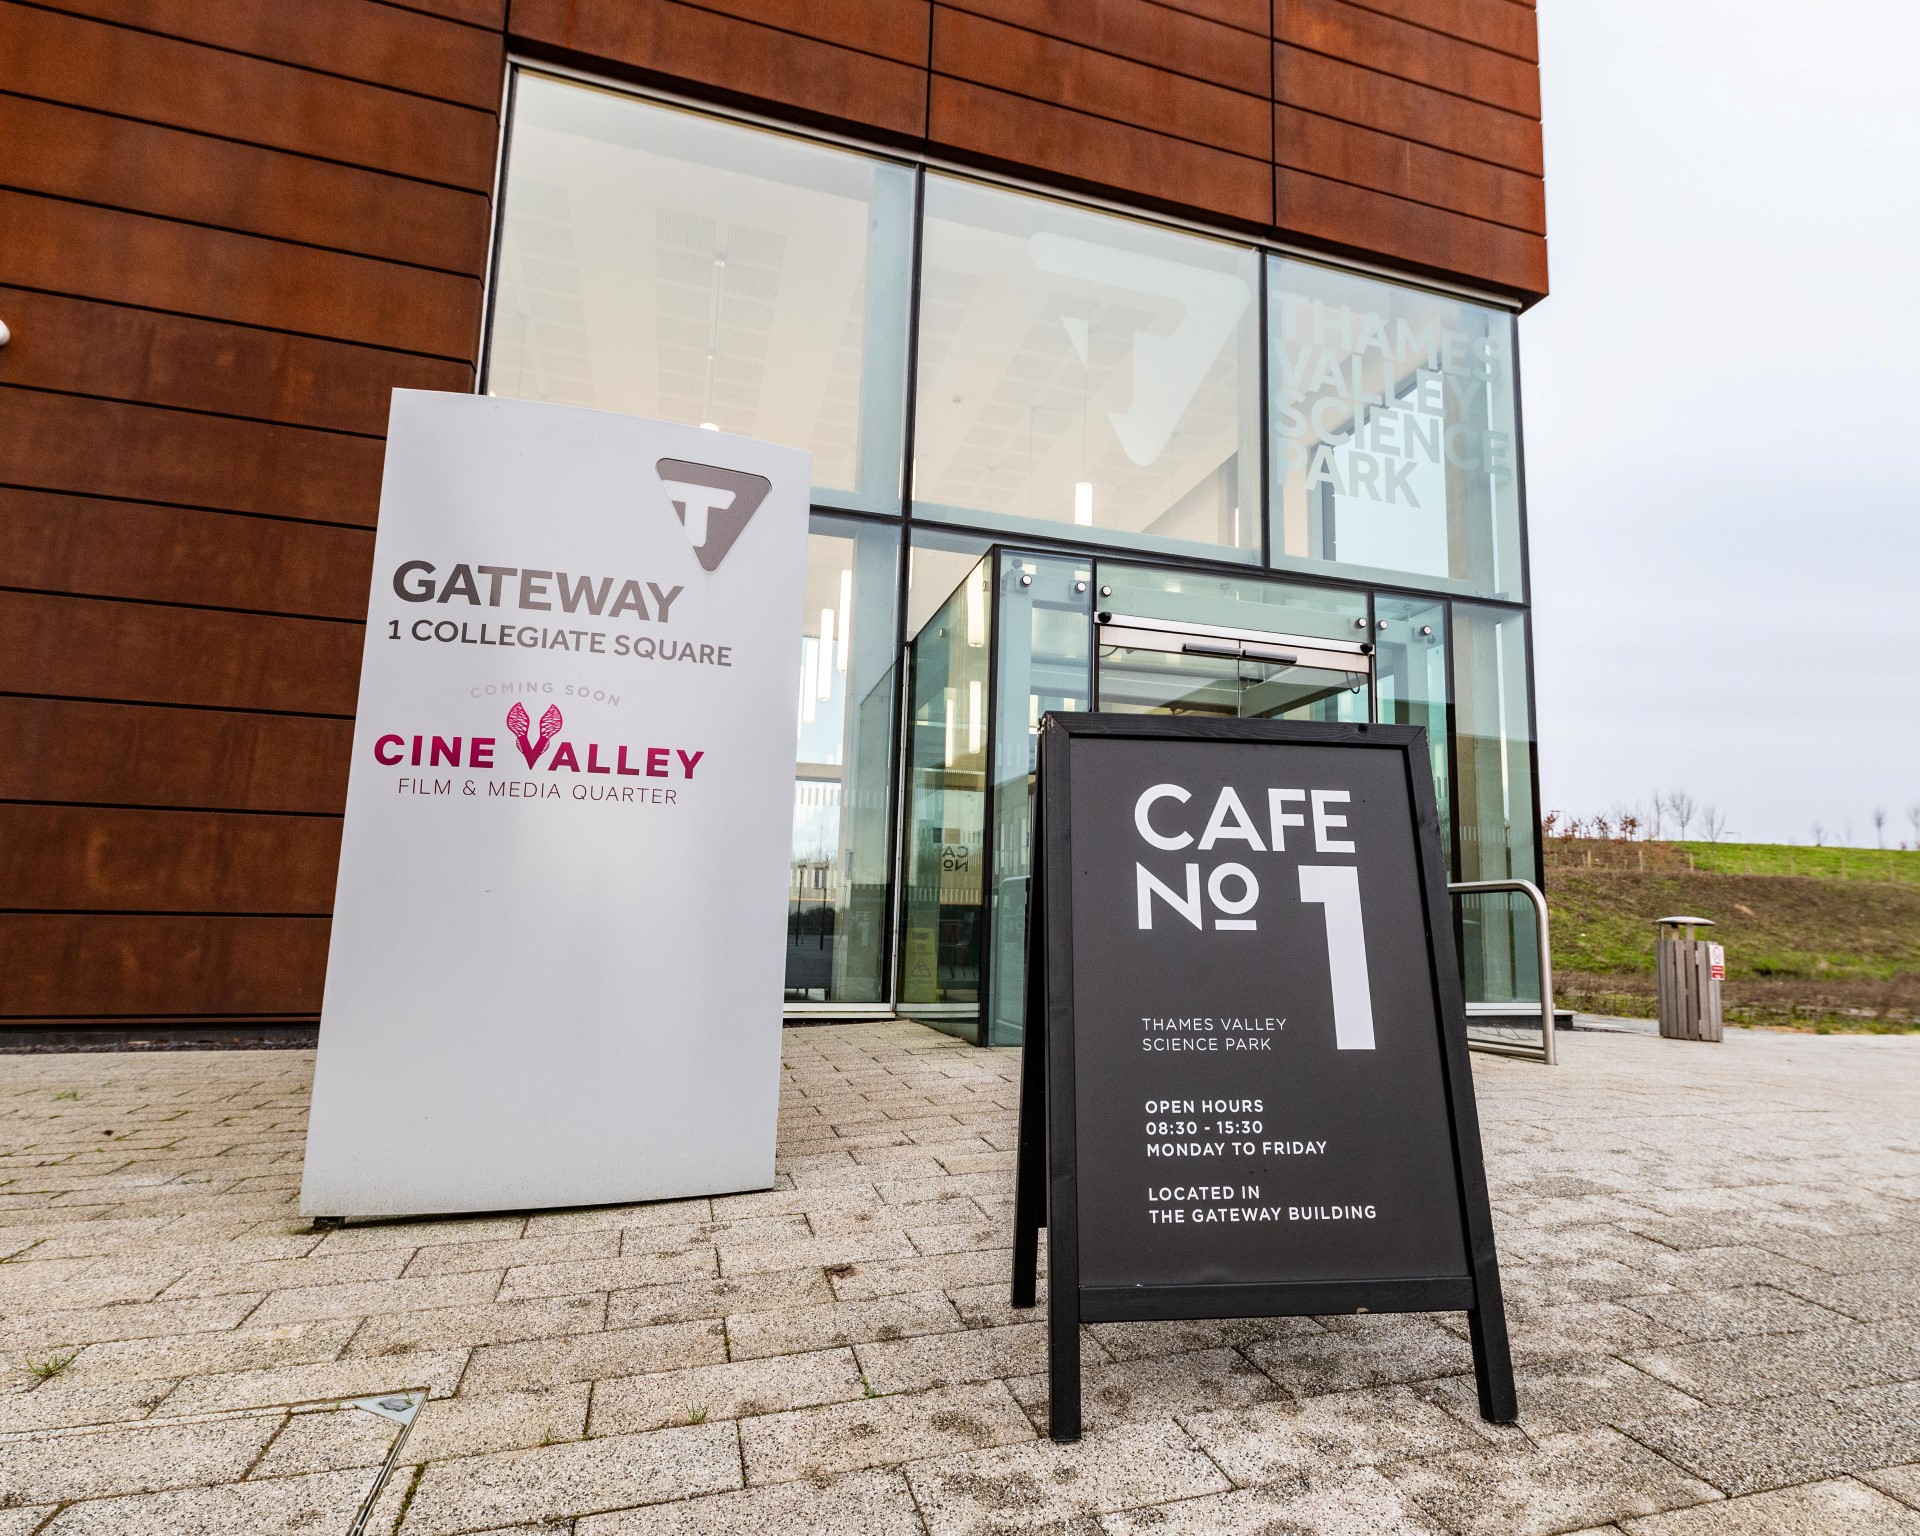 A photo of Cafe No 1 Thames Valley Science Park